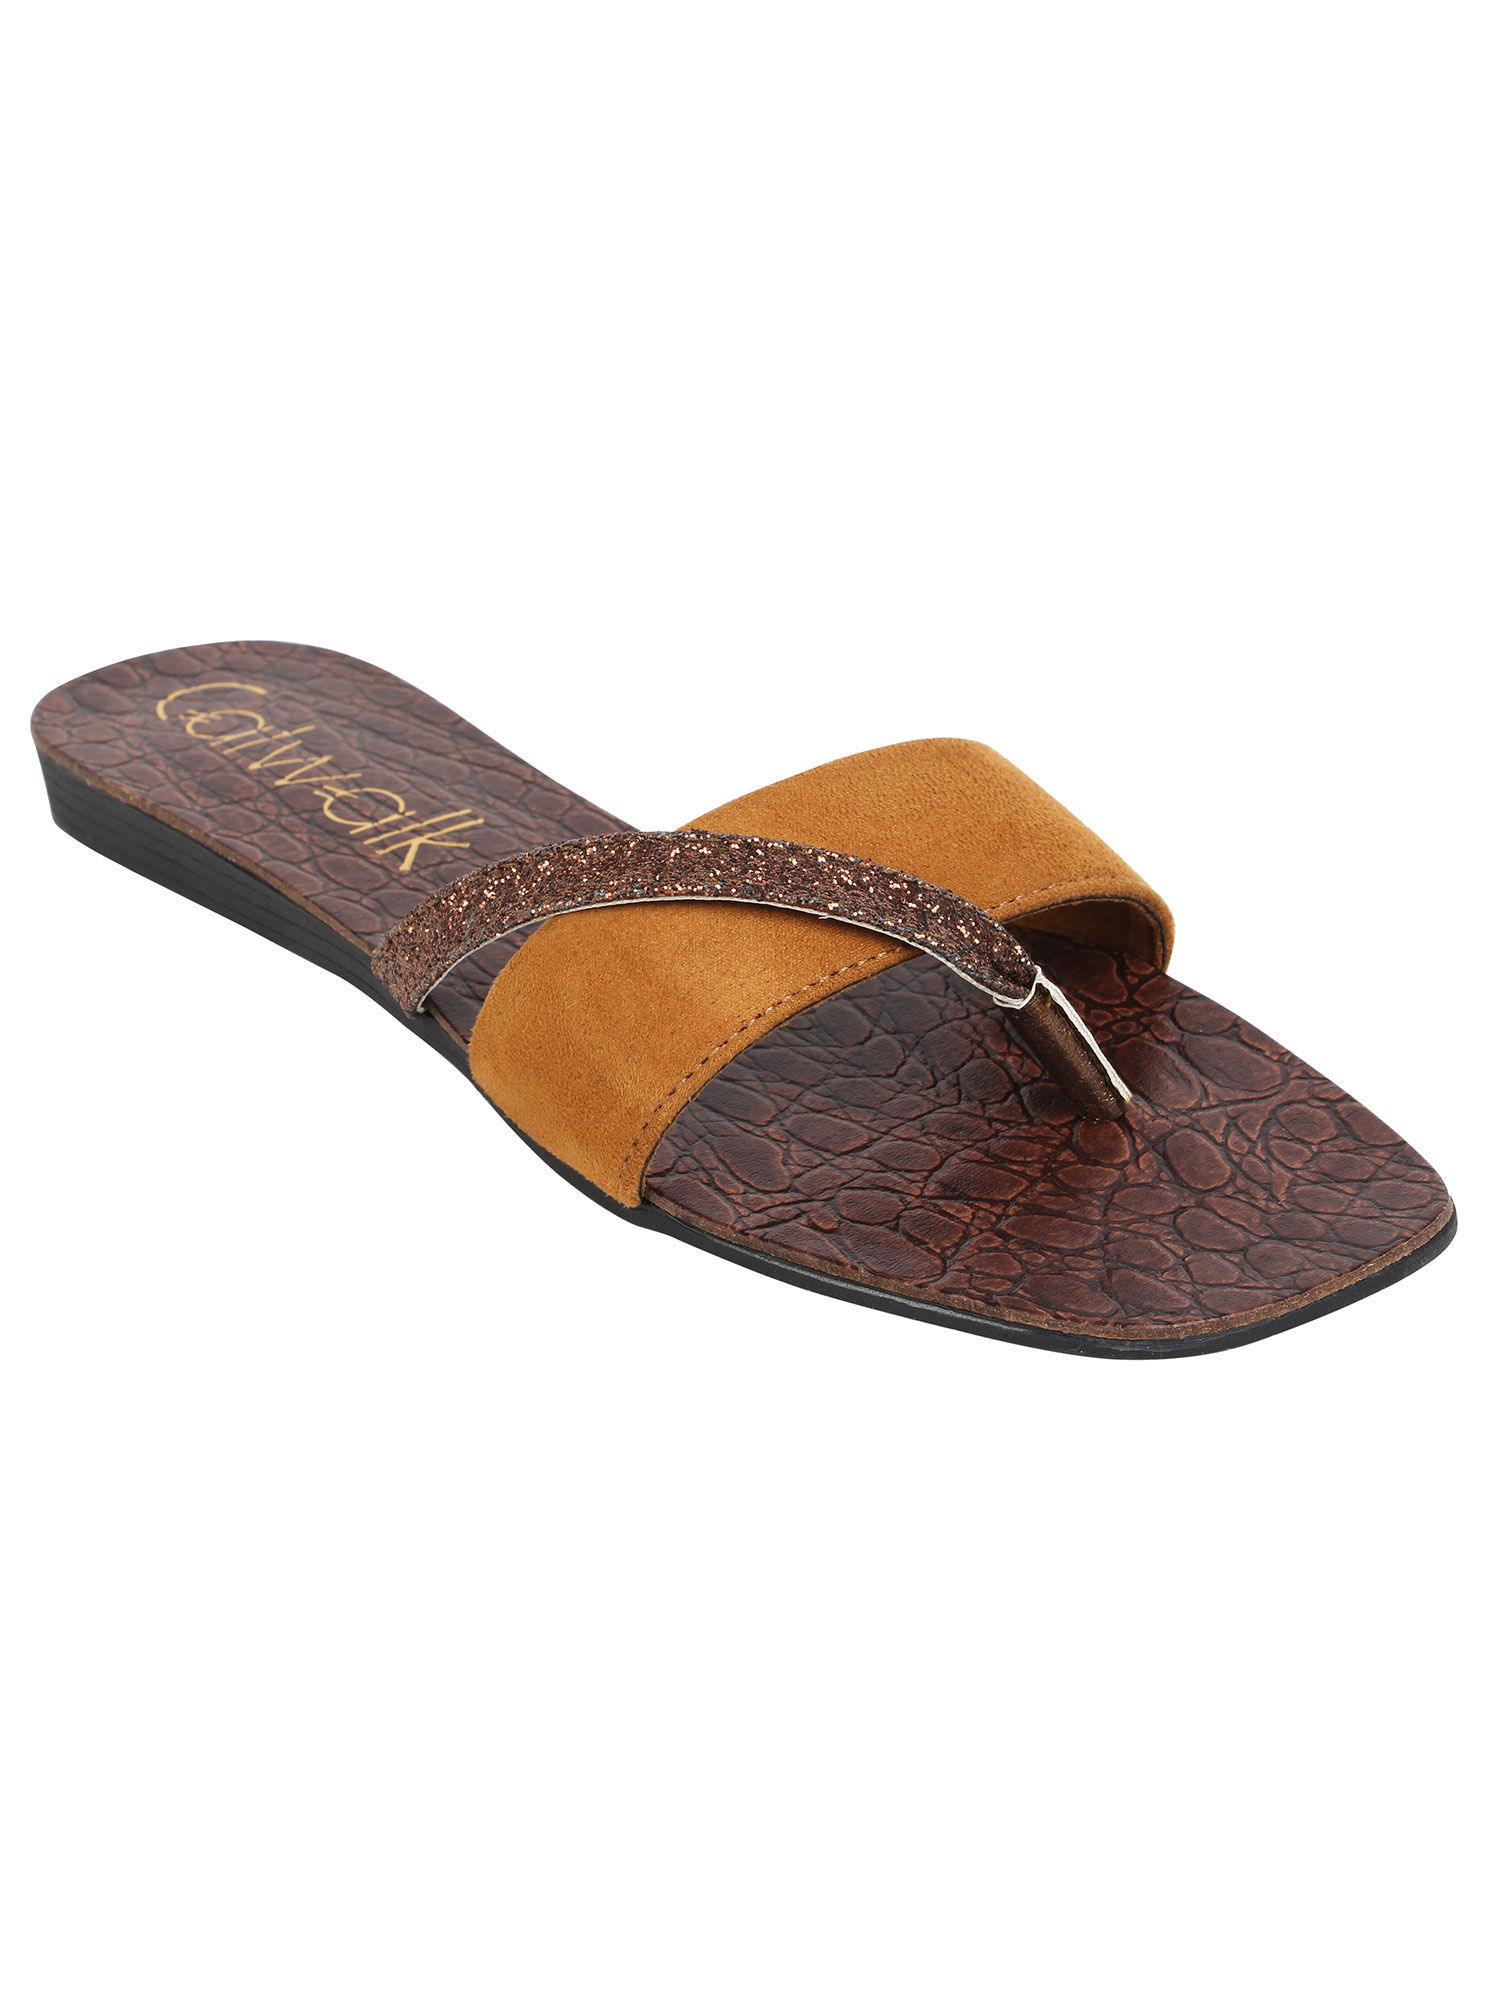 Buy Catwalk Sandals For Women ( Brown ) Online at Low Prices in India -  Paytmmall.com